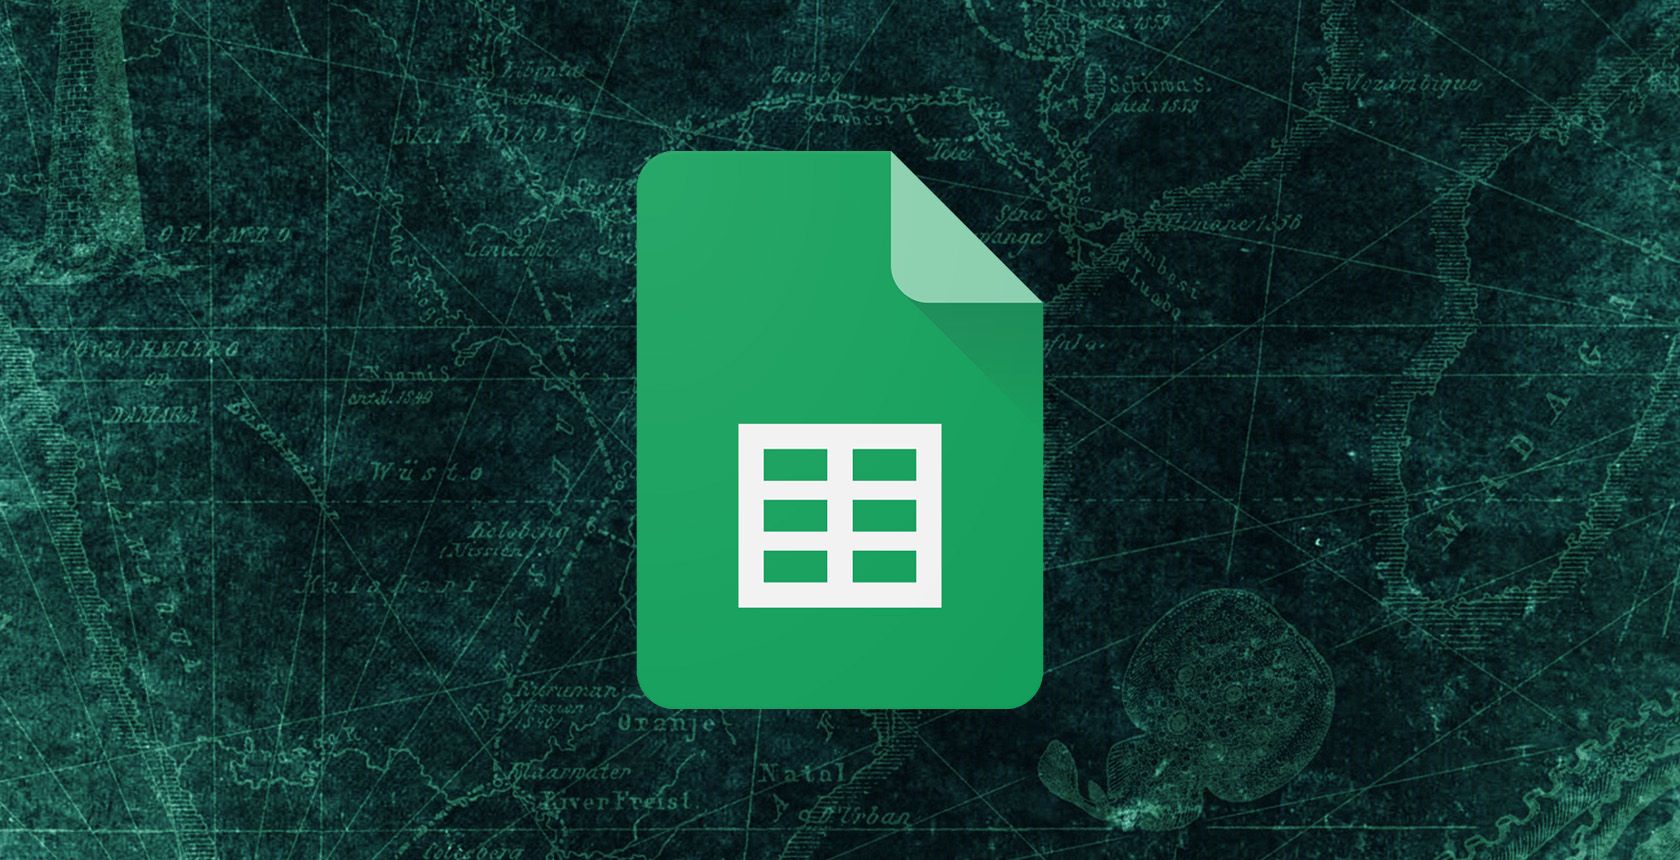 Handle multiple selected Google sheets in one go